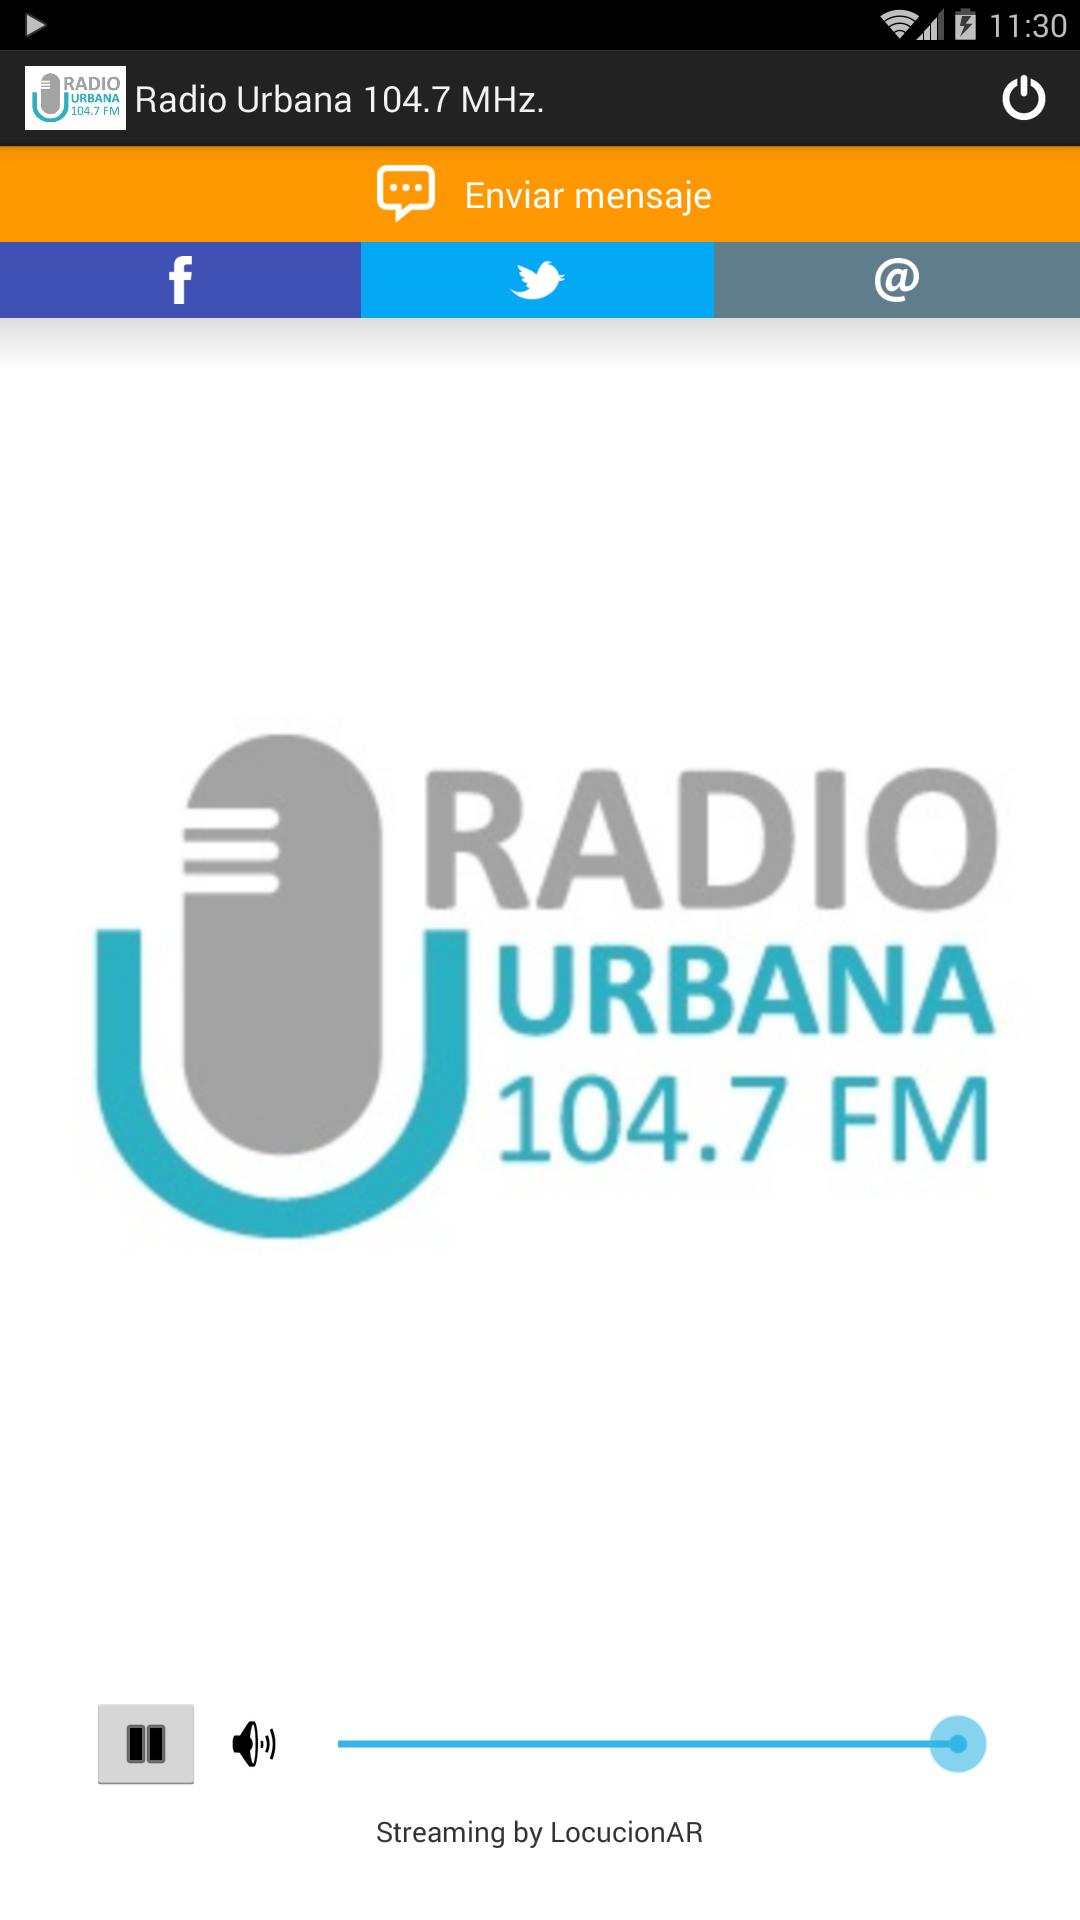 Radio Urbana 104.7 MHz. for Android - APK Download